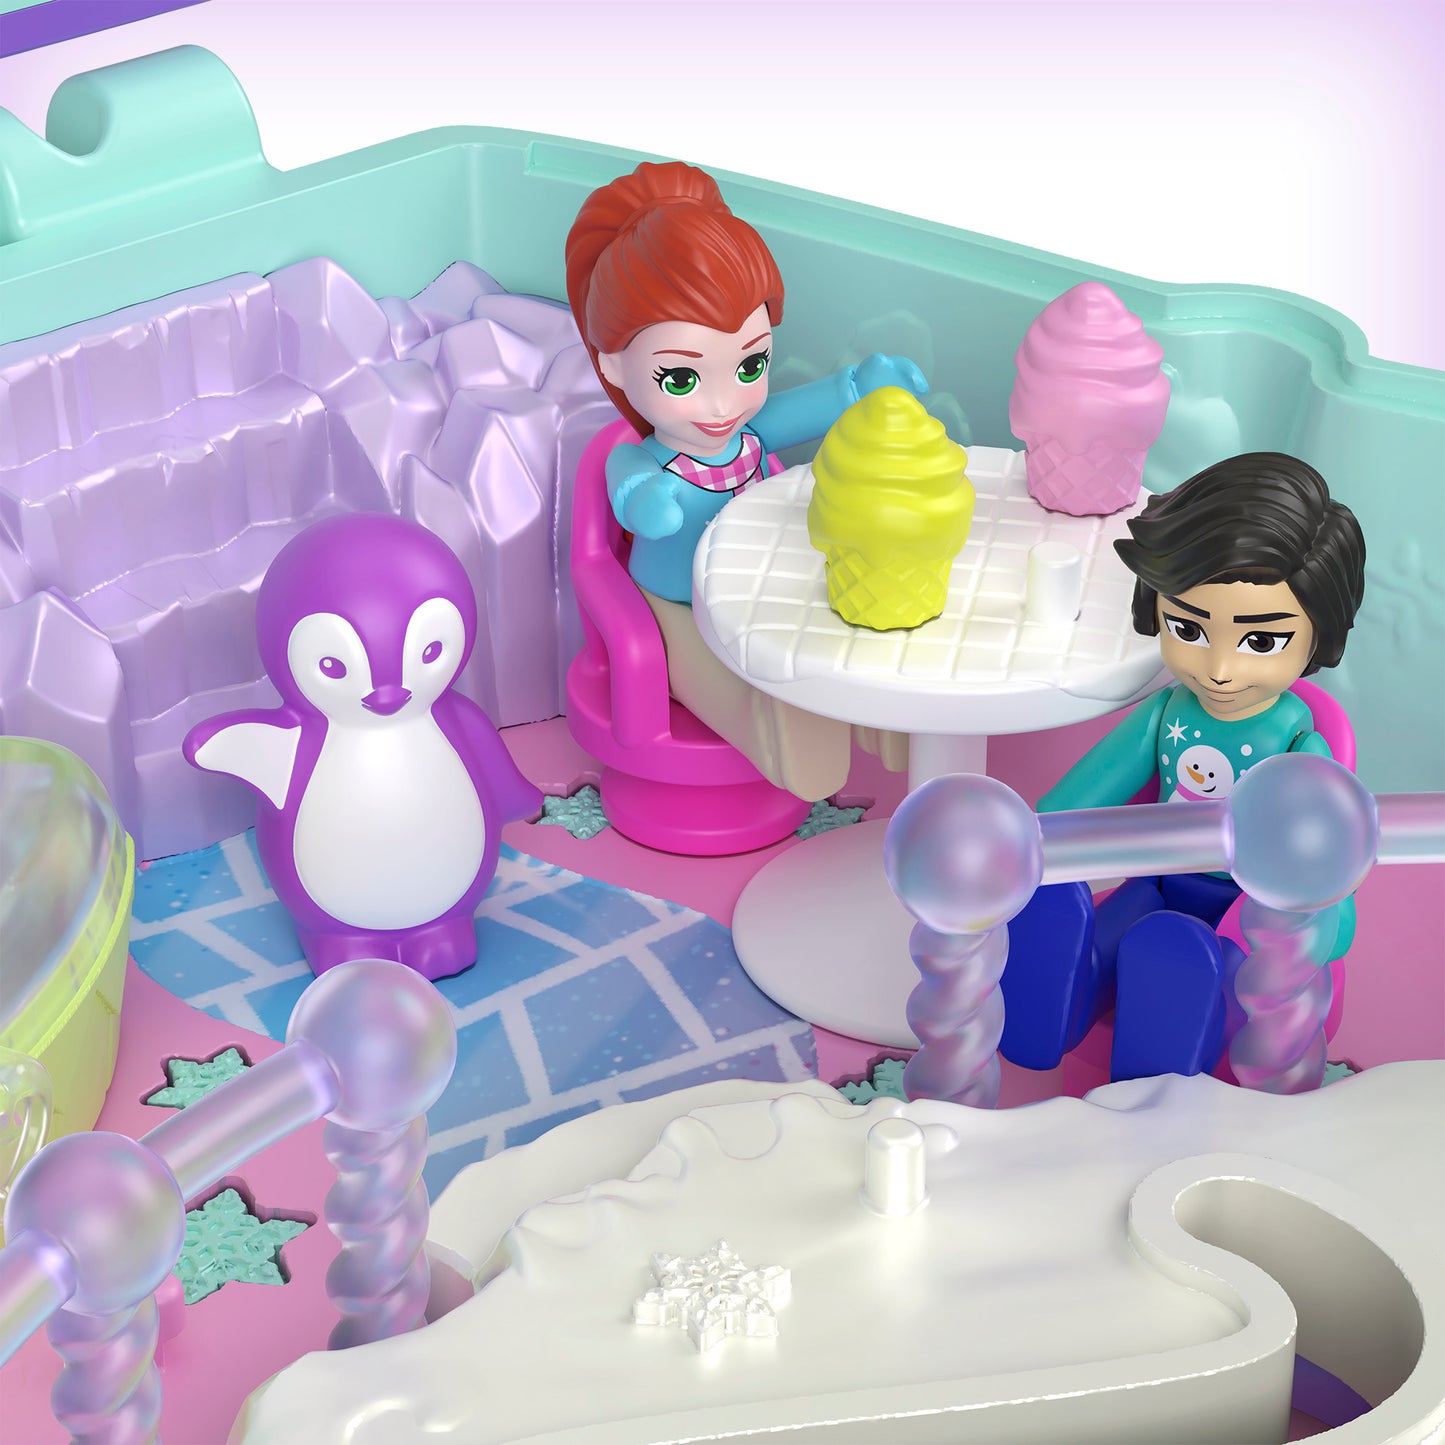 POLLY POCKET Snow Sweet Penguin Compact